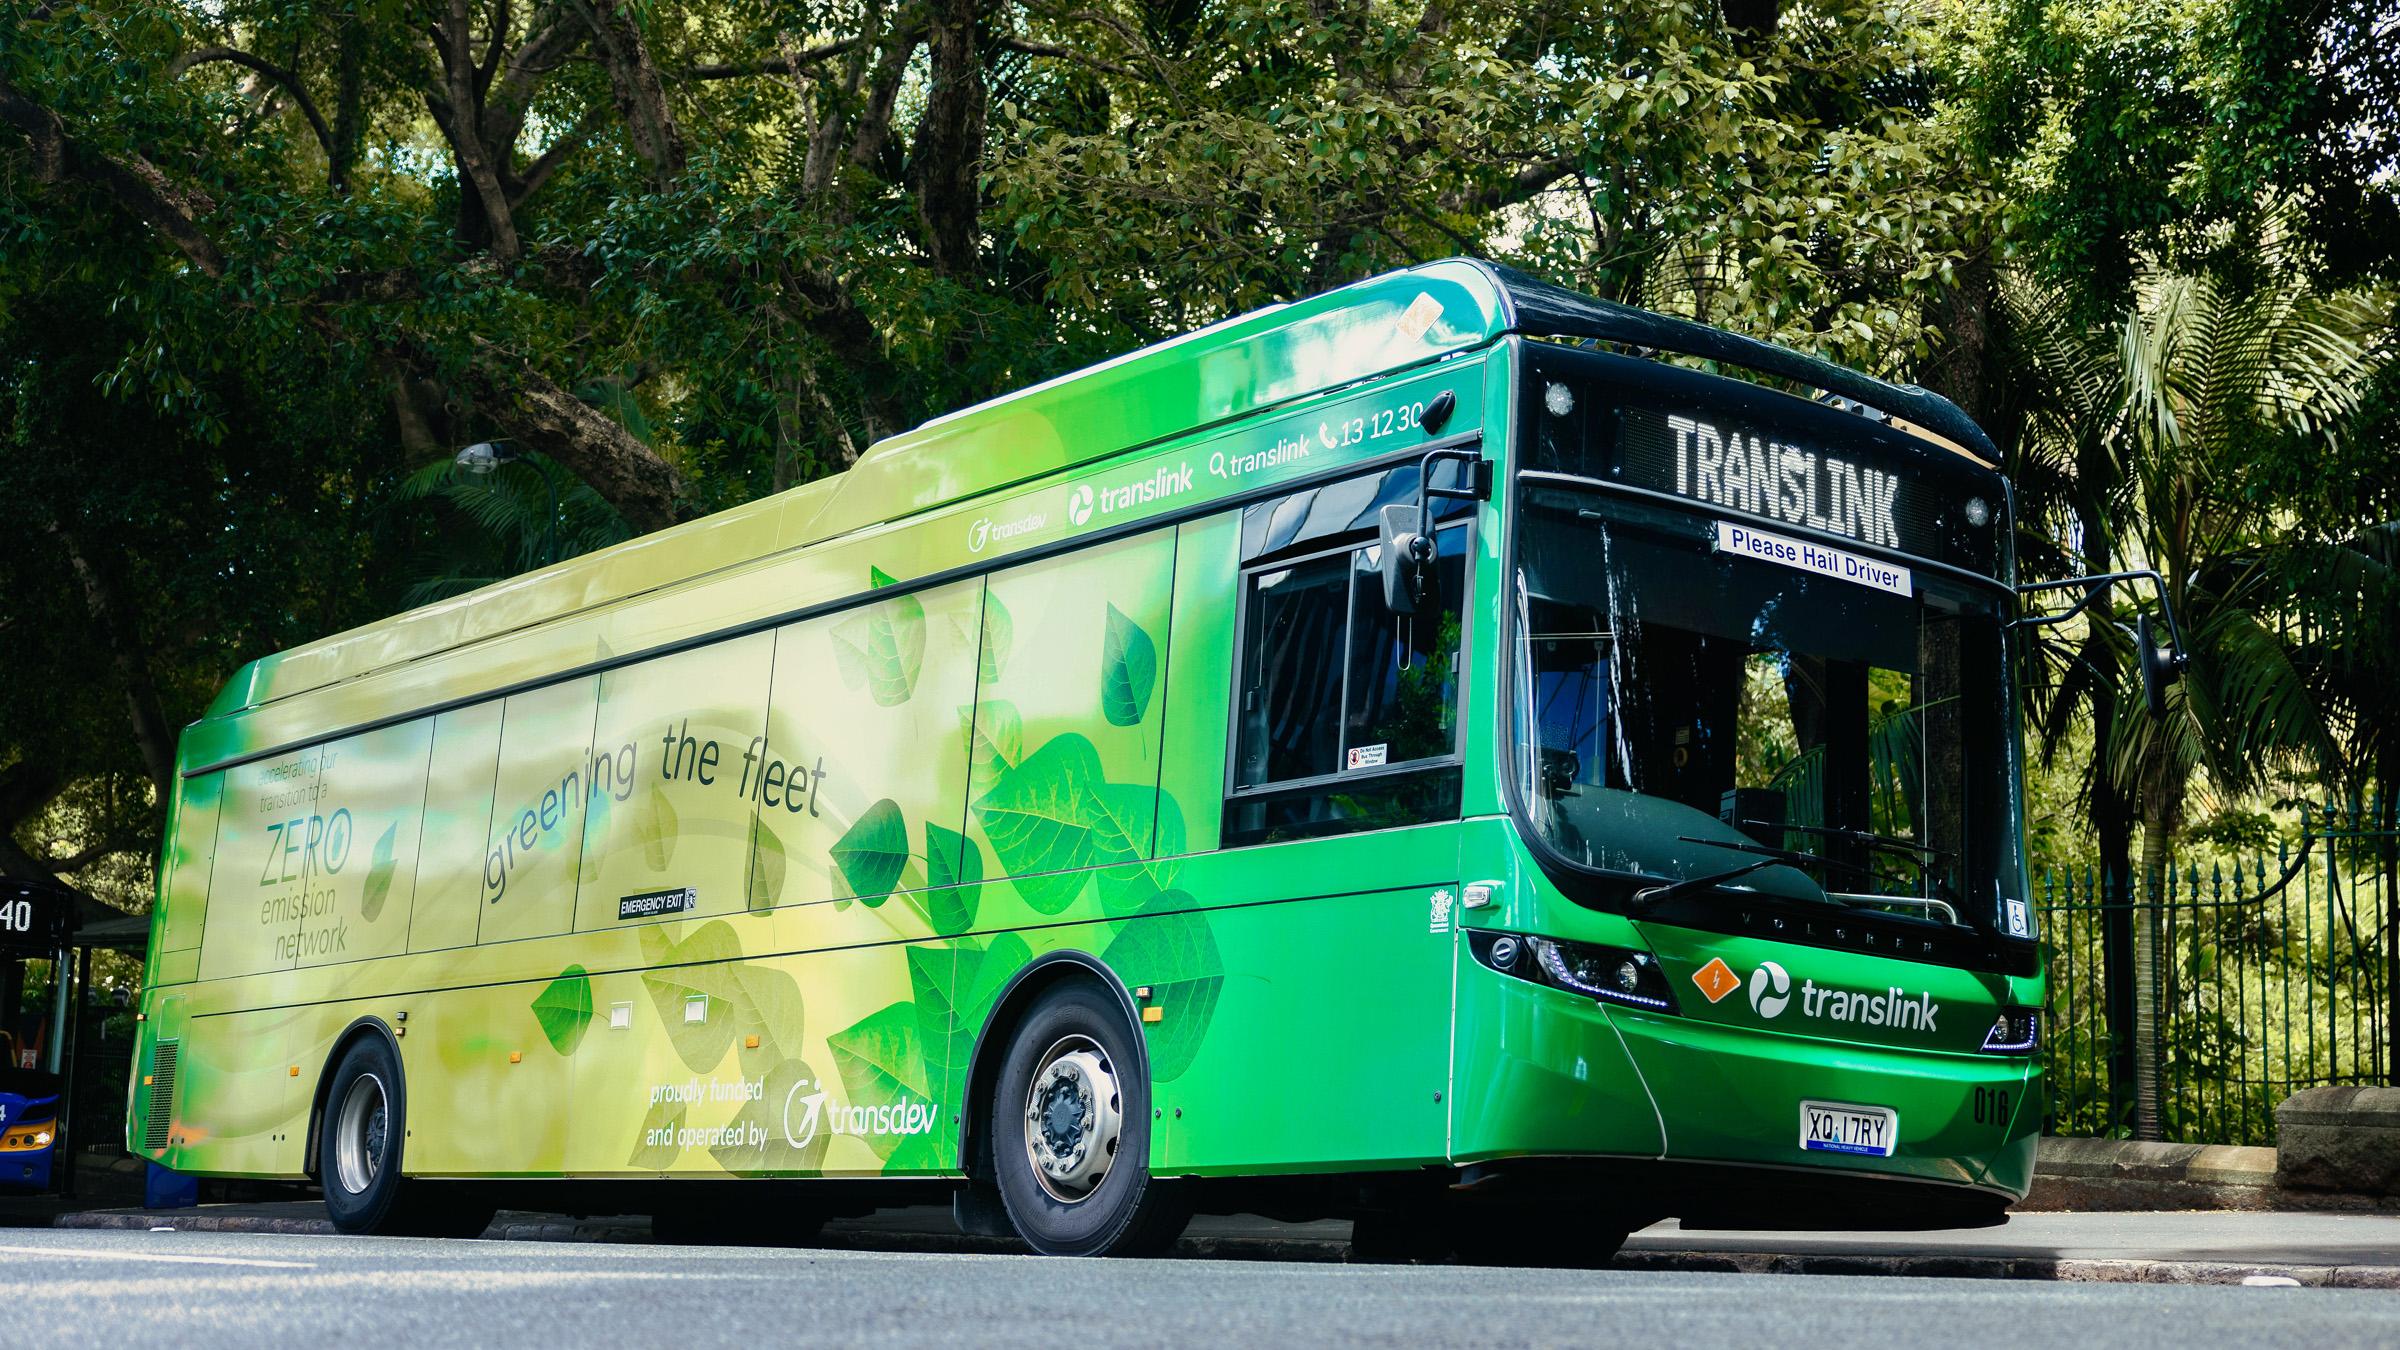 Zero Emissions electric Translink bus, with green leaves painted on the side